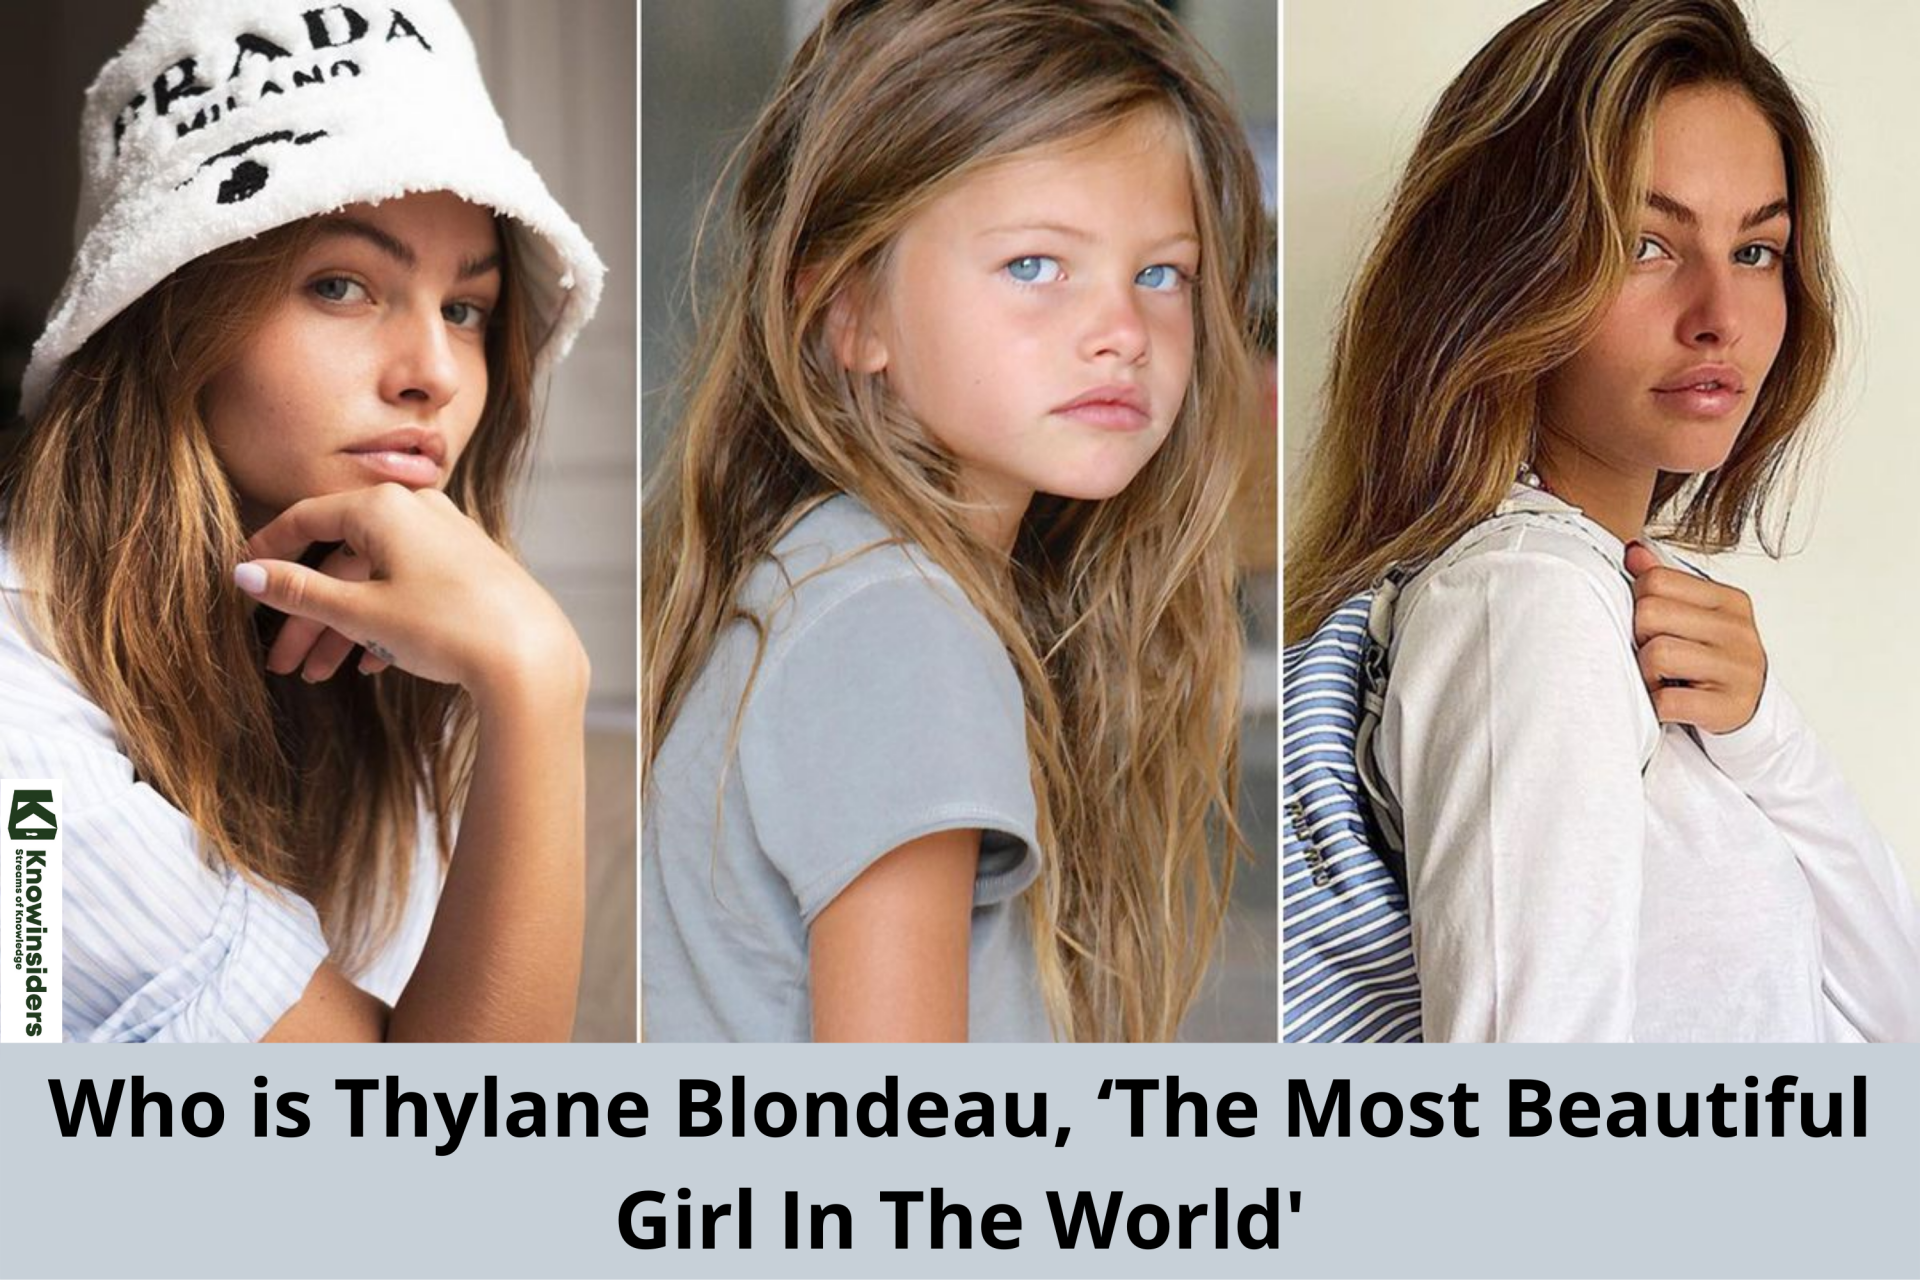 Who is Thylane Blondeau - the Most Beautiful Girl In The World